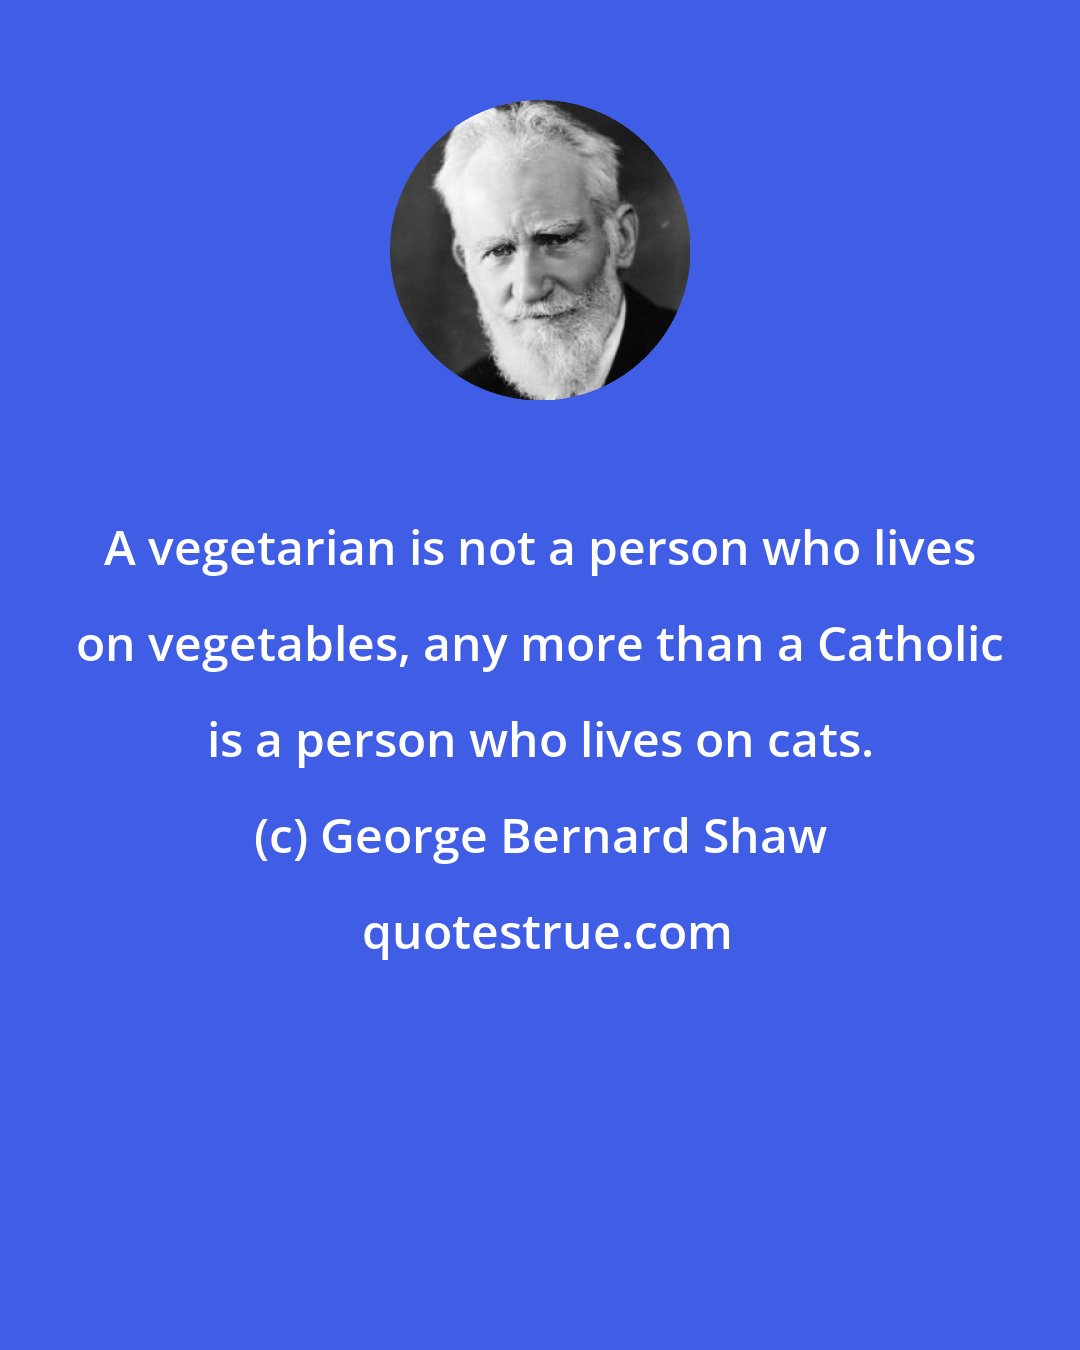 George Bernard Shaw: A vegetarian is not a person who lives on vegetables, any more than a Catholic is a person who lives on cats.